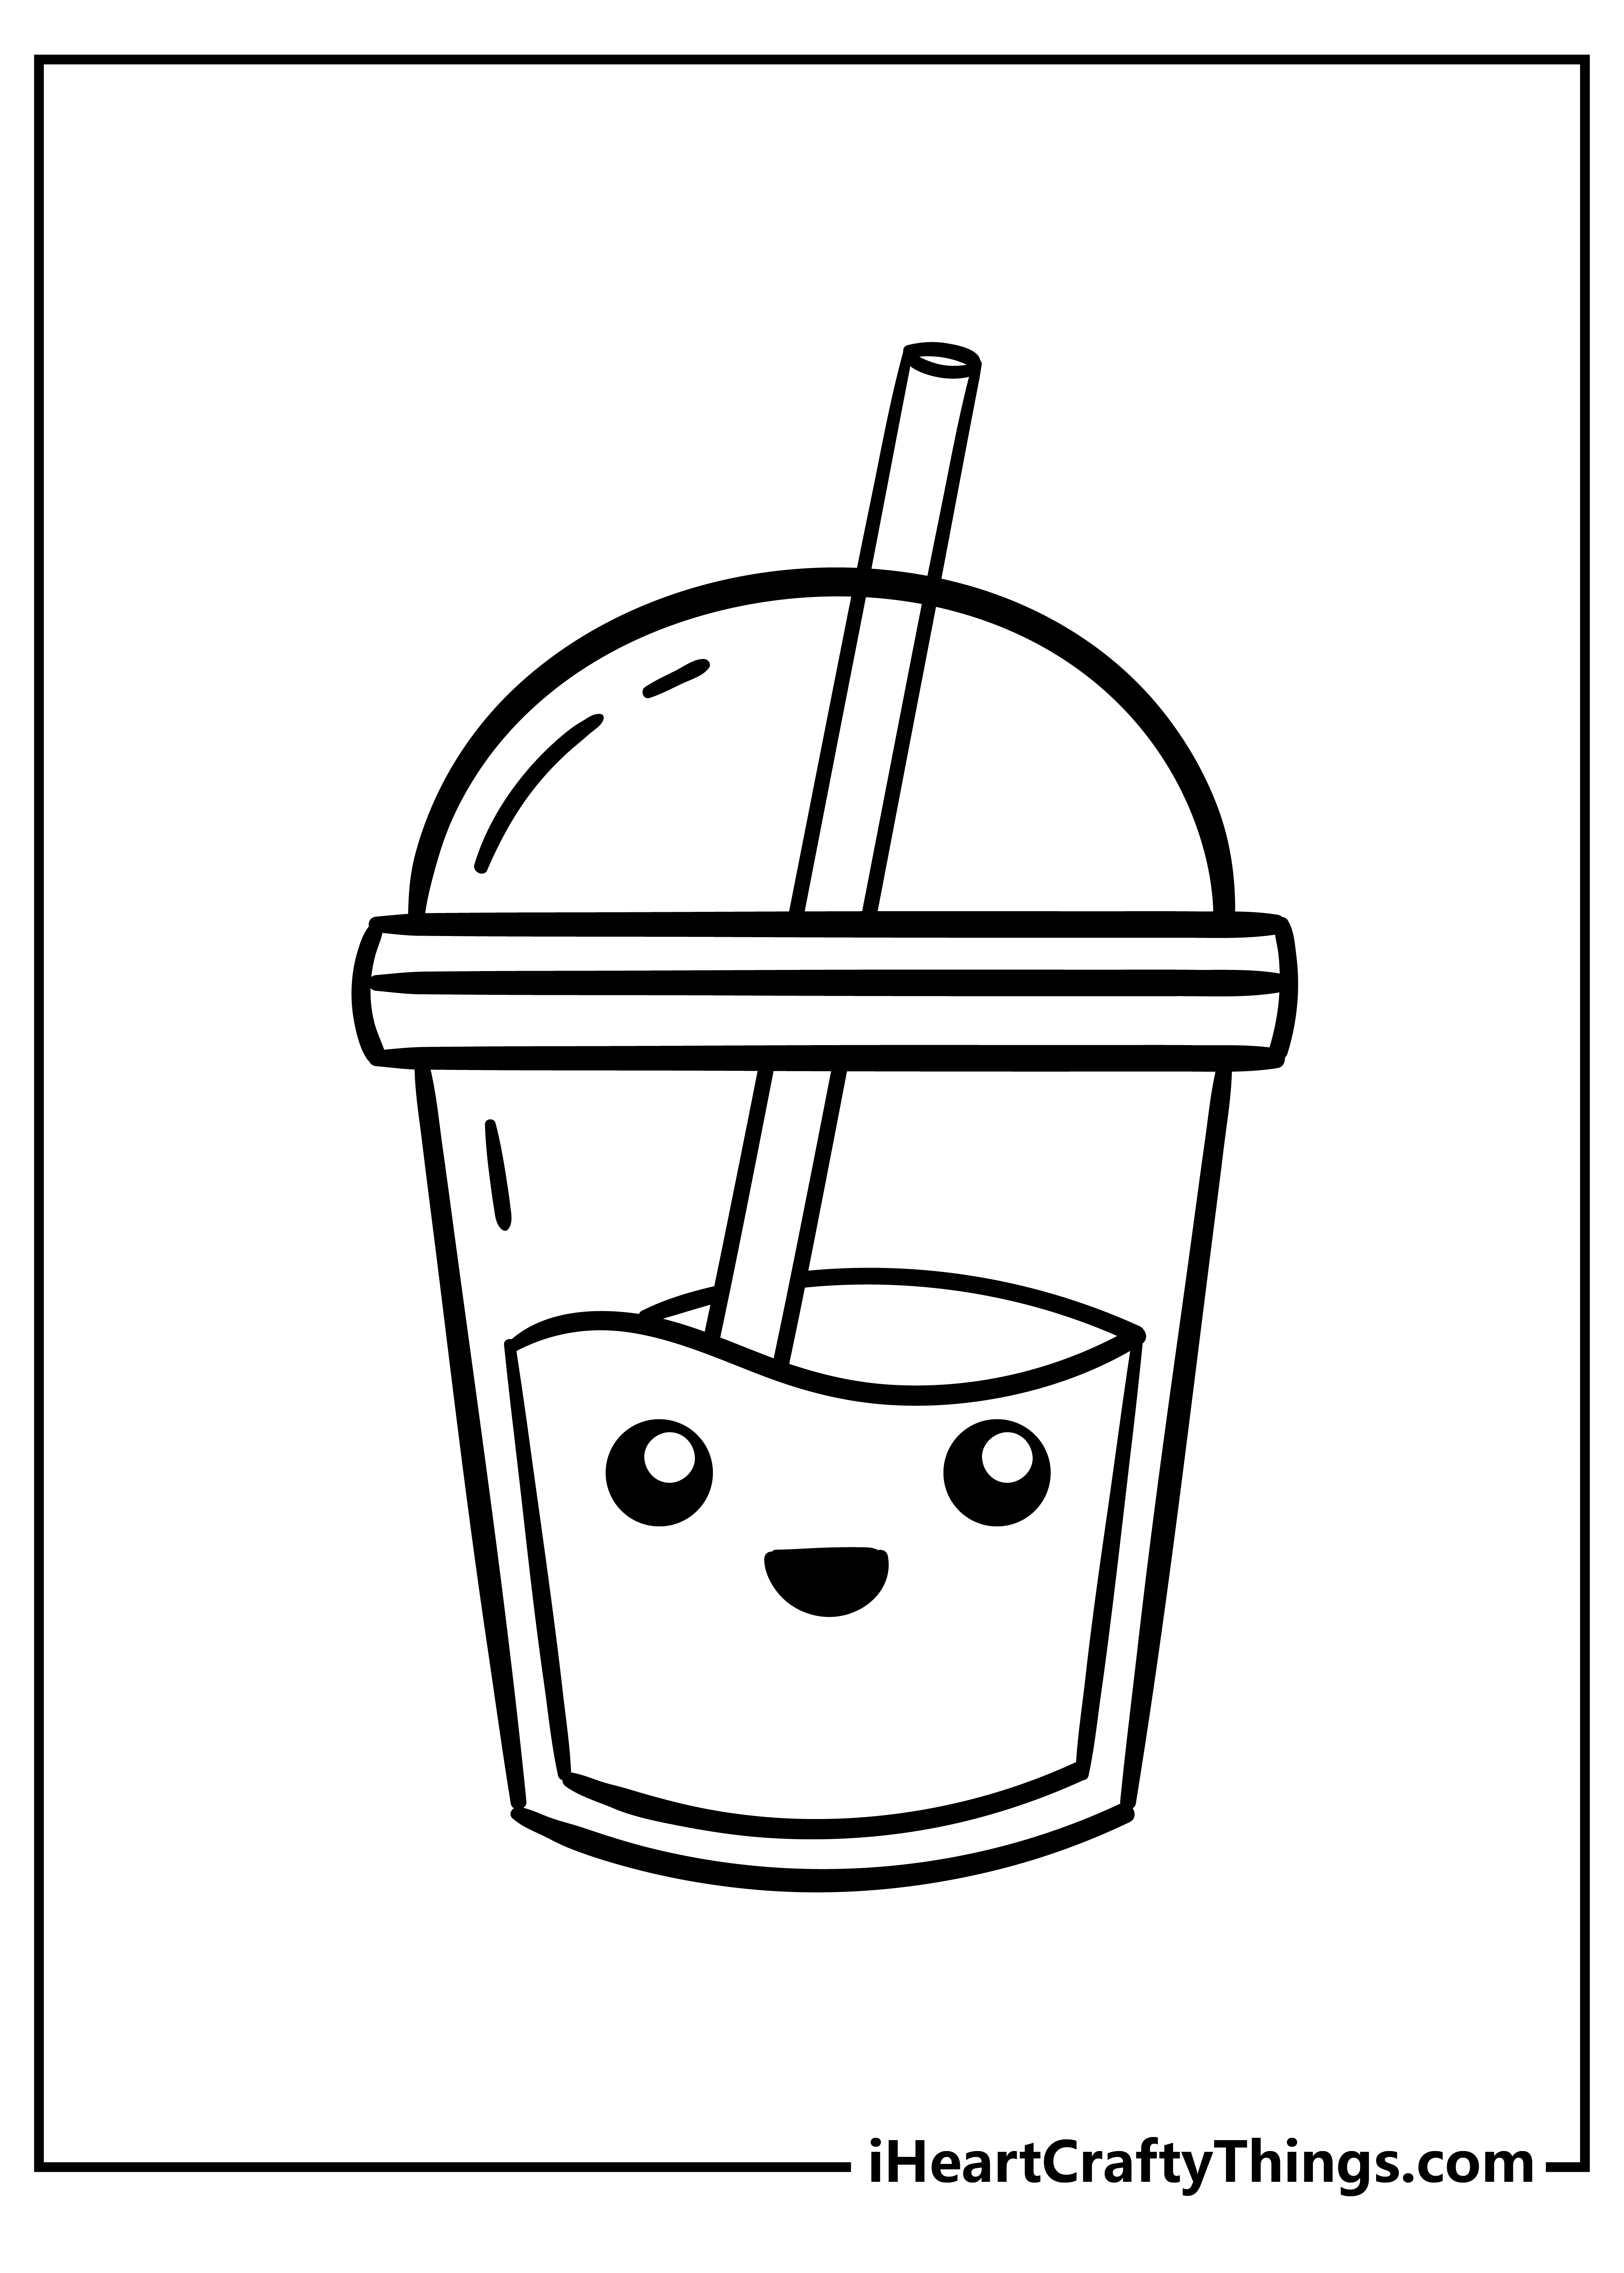 Cute food coloring pages free printables